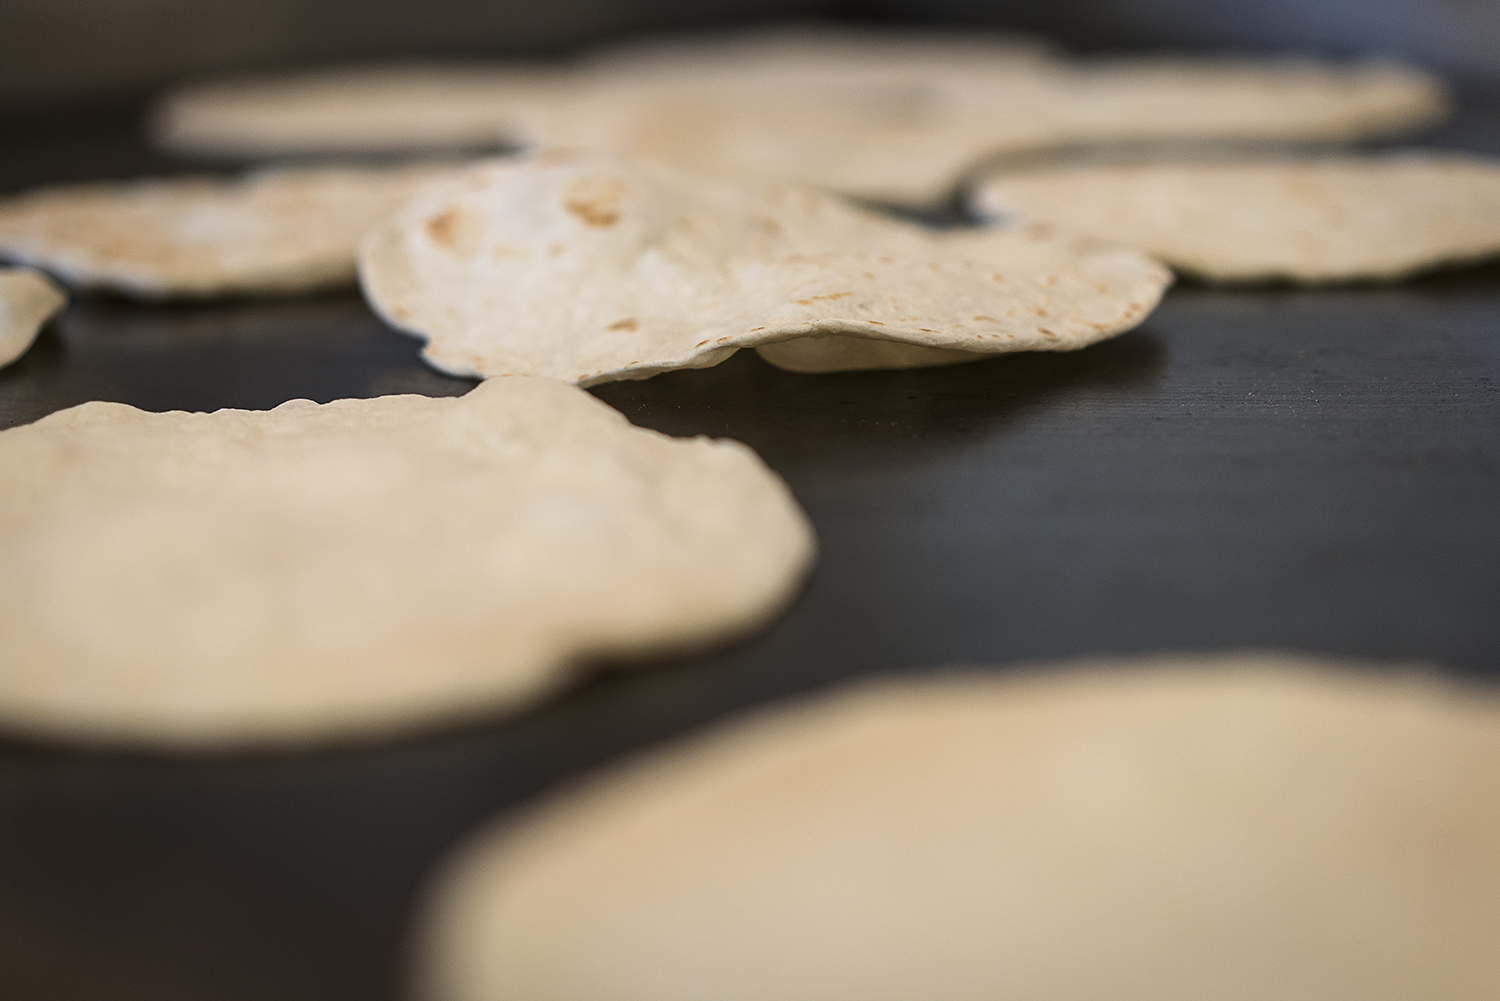 Homemade flour tortillas bubble and brown on the cooktop in the kitchen at the San Juan Diego Activity Center at Our Lady of Guadalupe Catholic Church. 